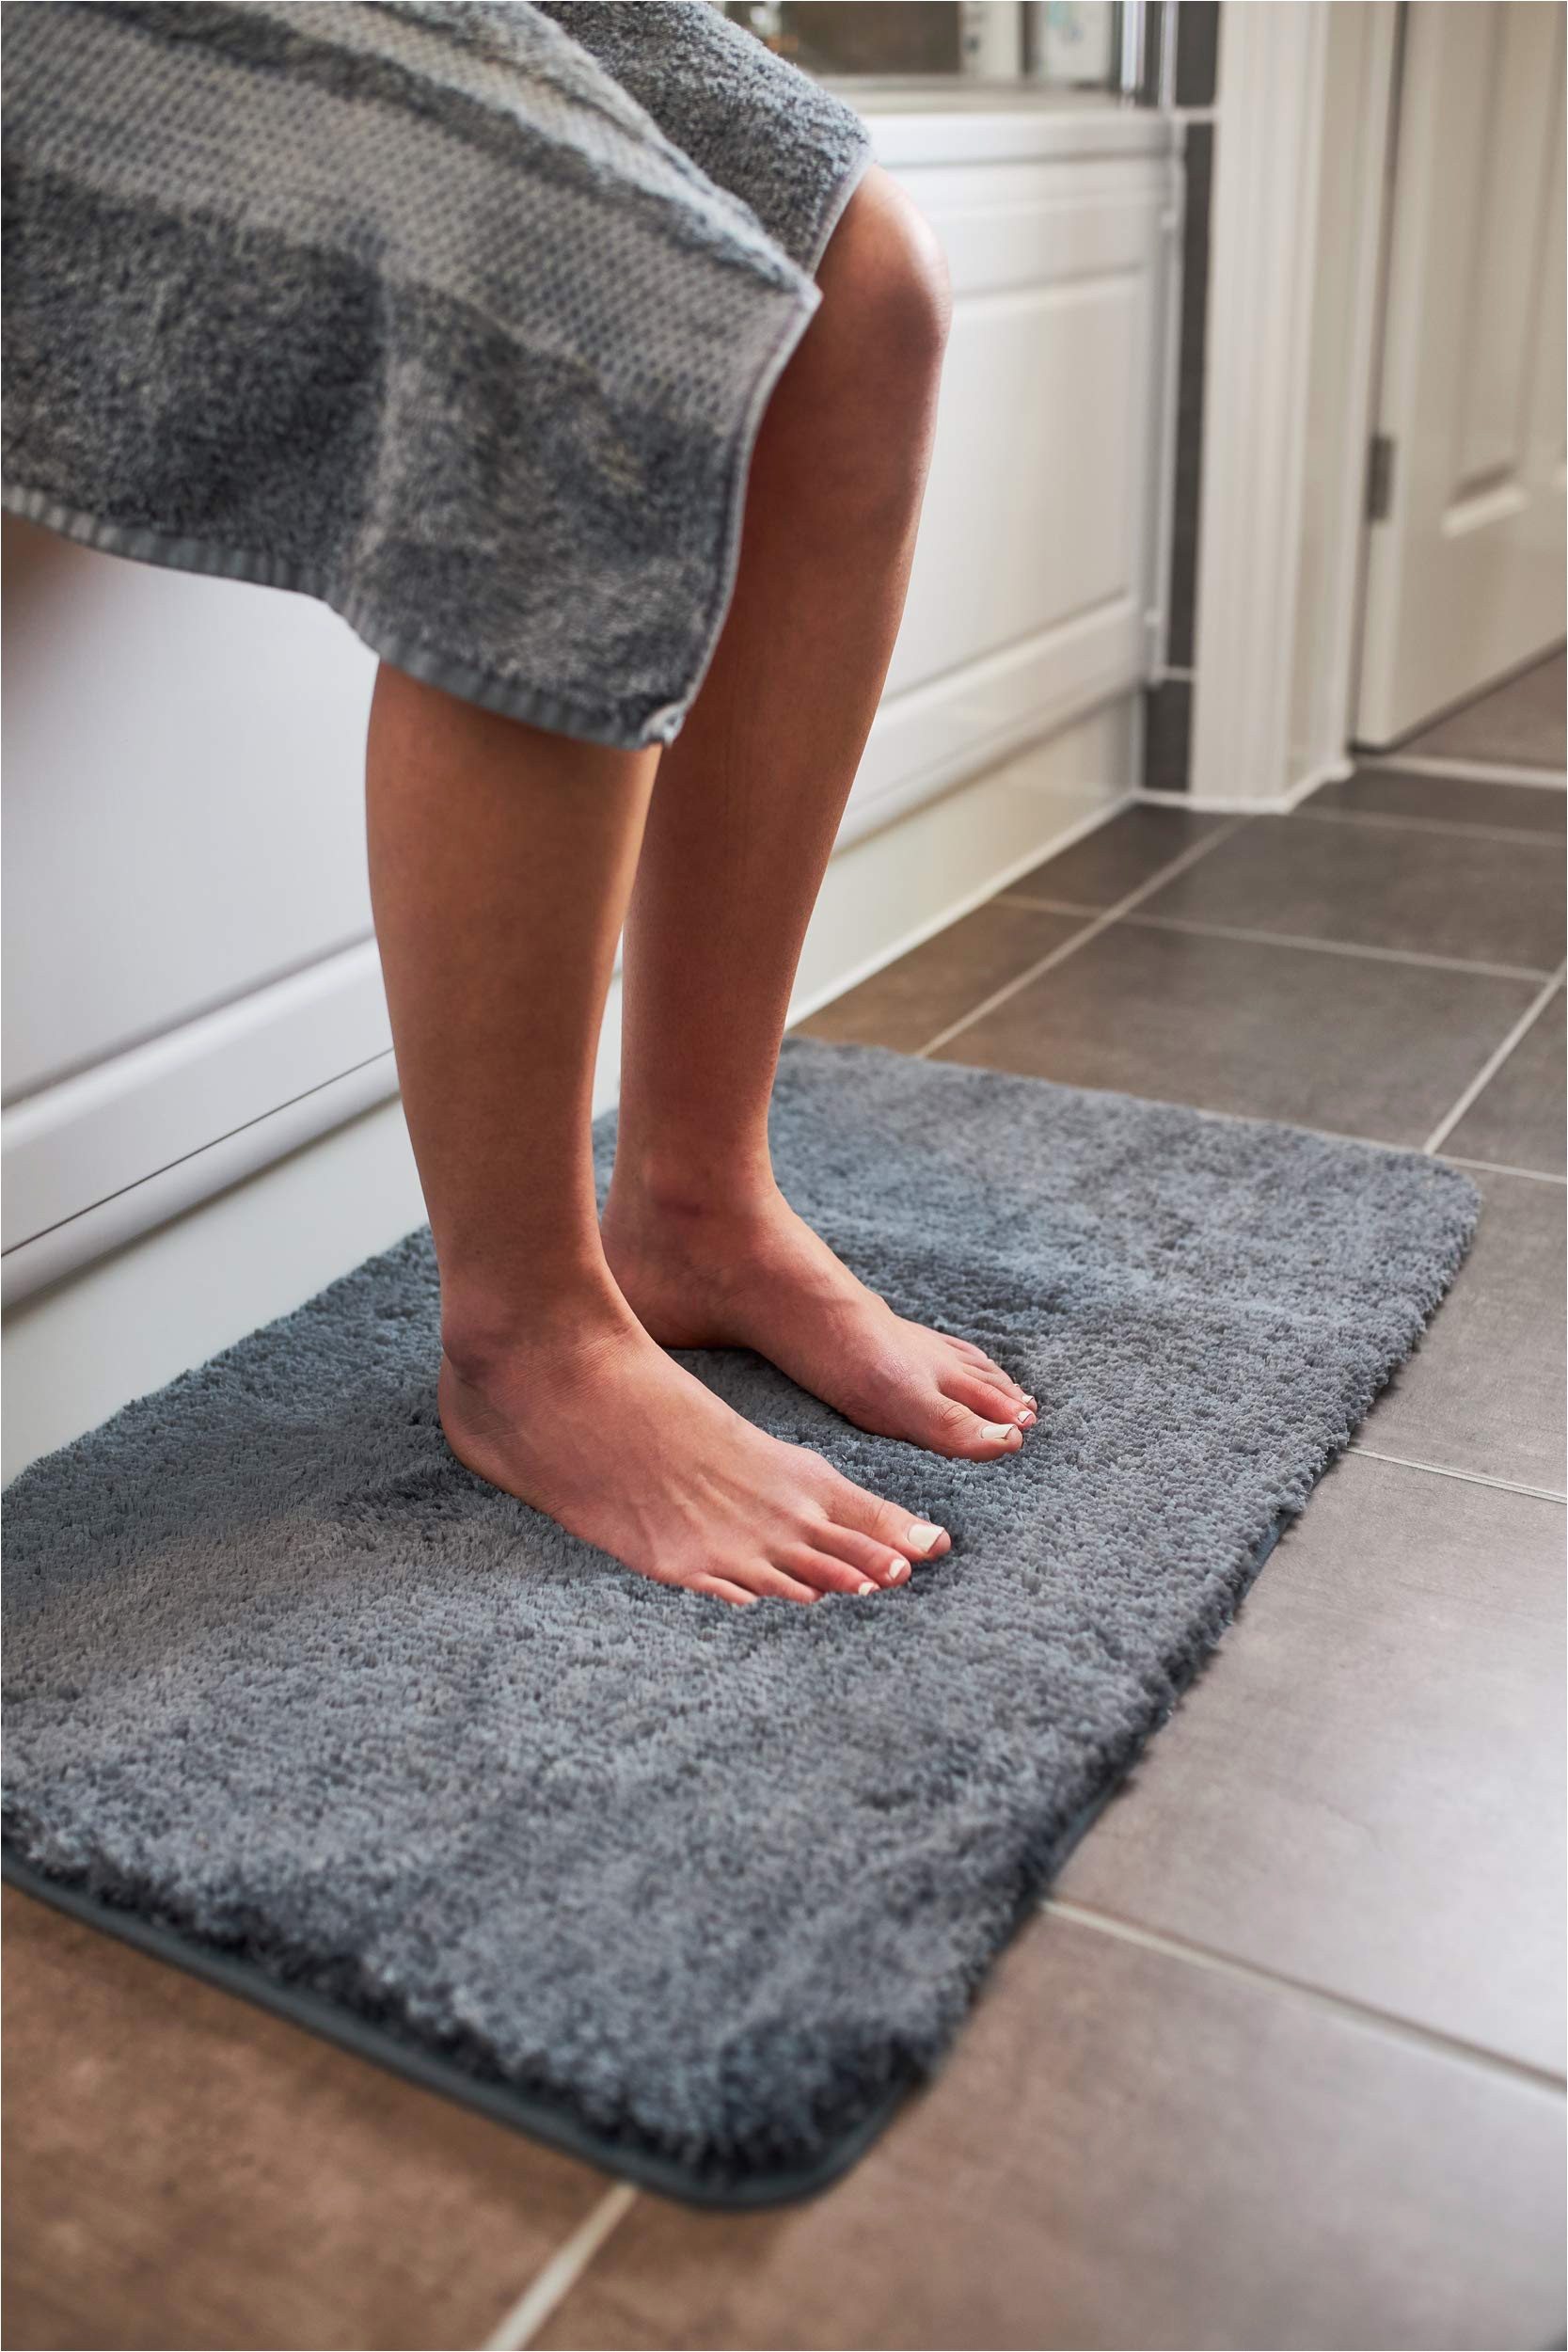 Top Rated Bath Rugs Luxury Grey Bath Mat Microfiber Non Slip Bath Rug with Super soft Absorbent Dry Fast Design for Bath and Shower